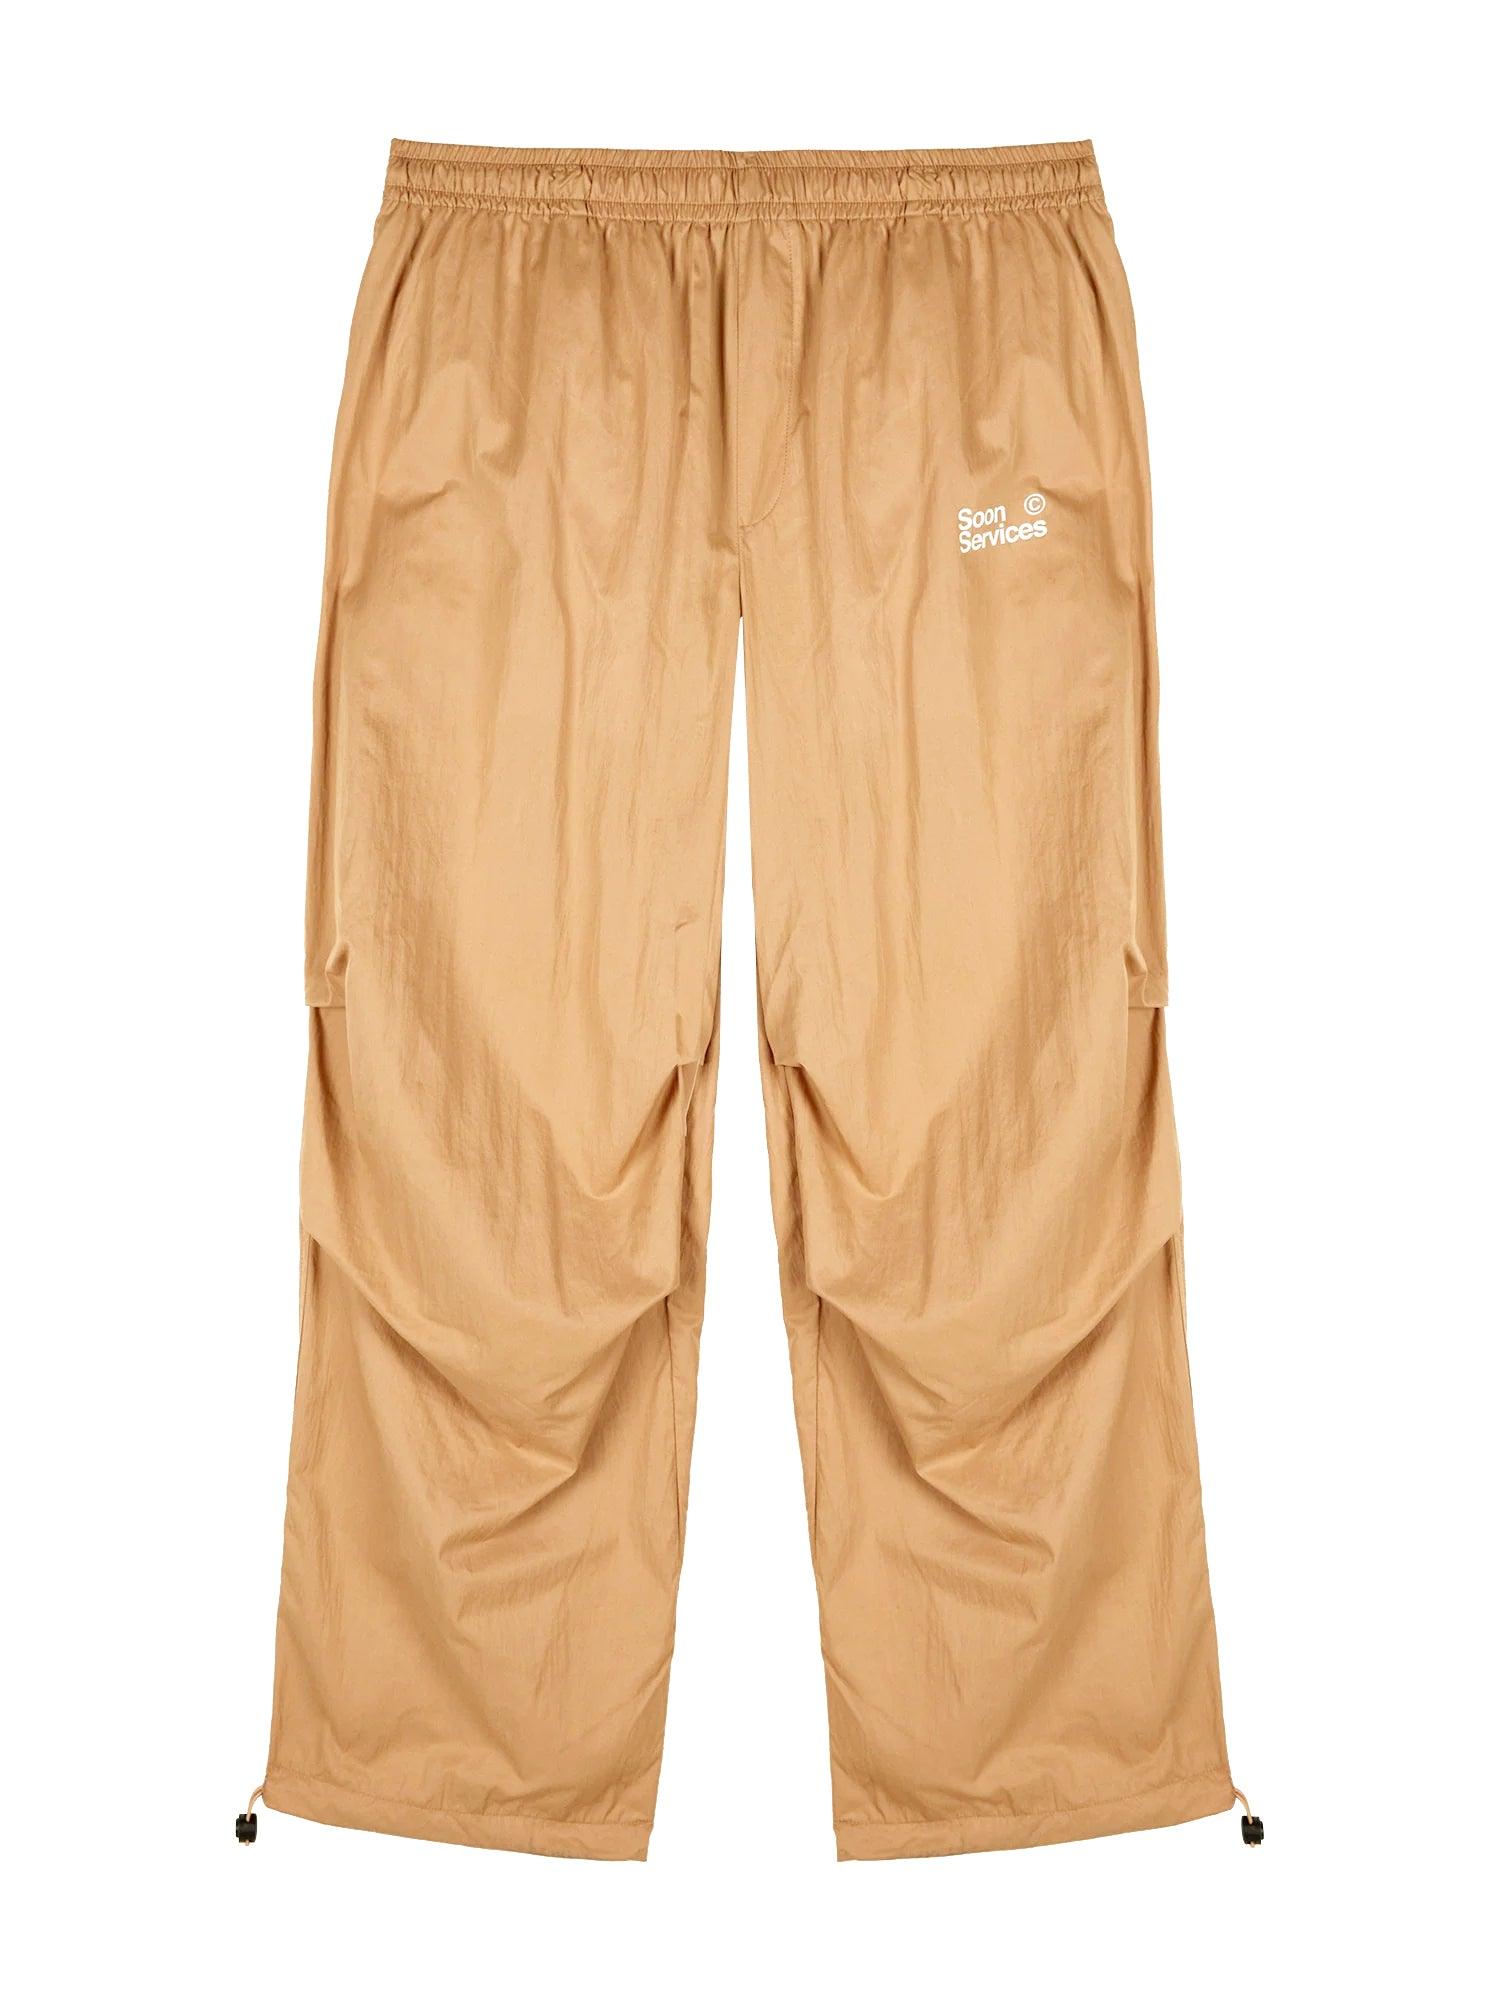 Soon Services Track Pants